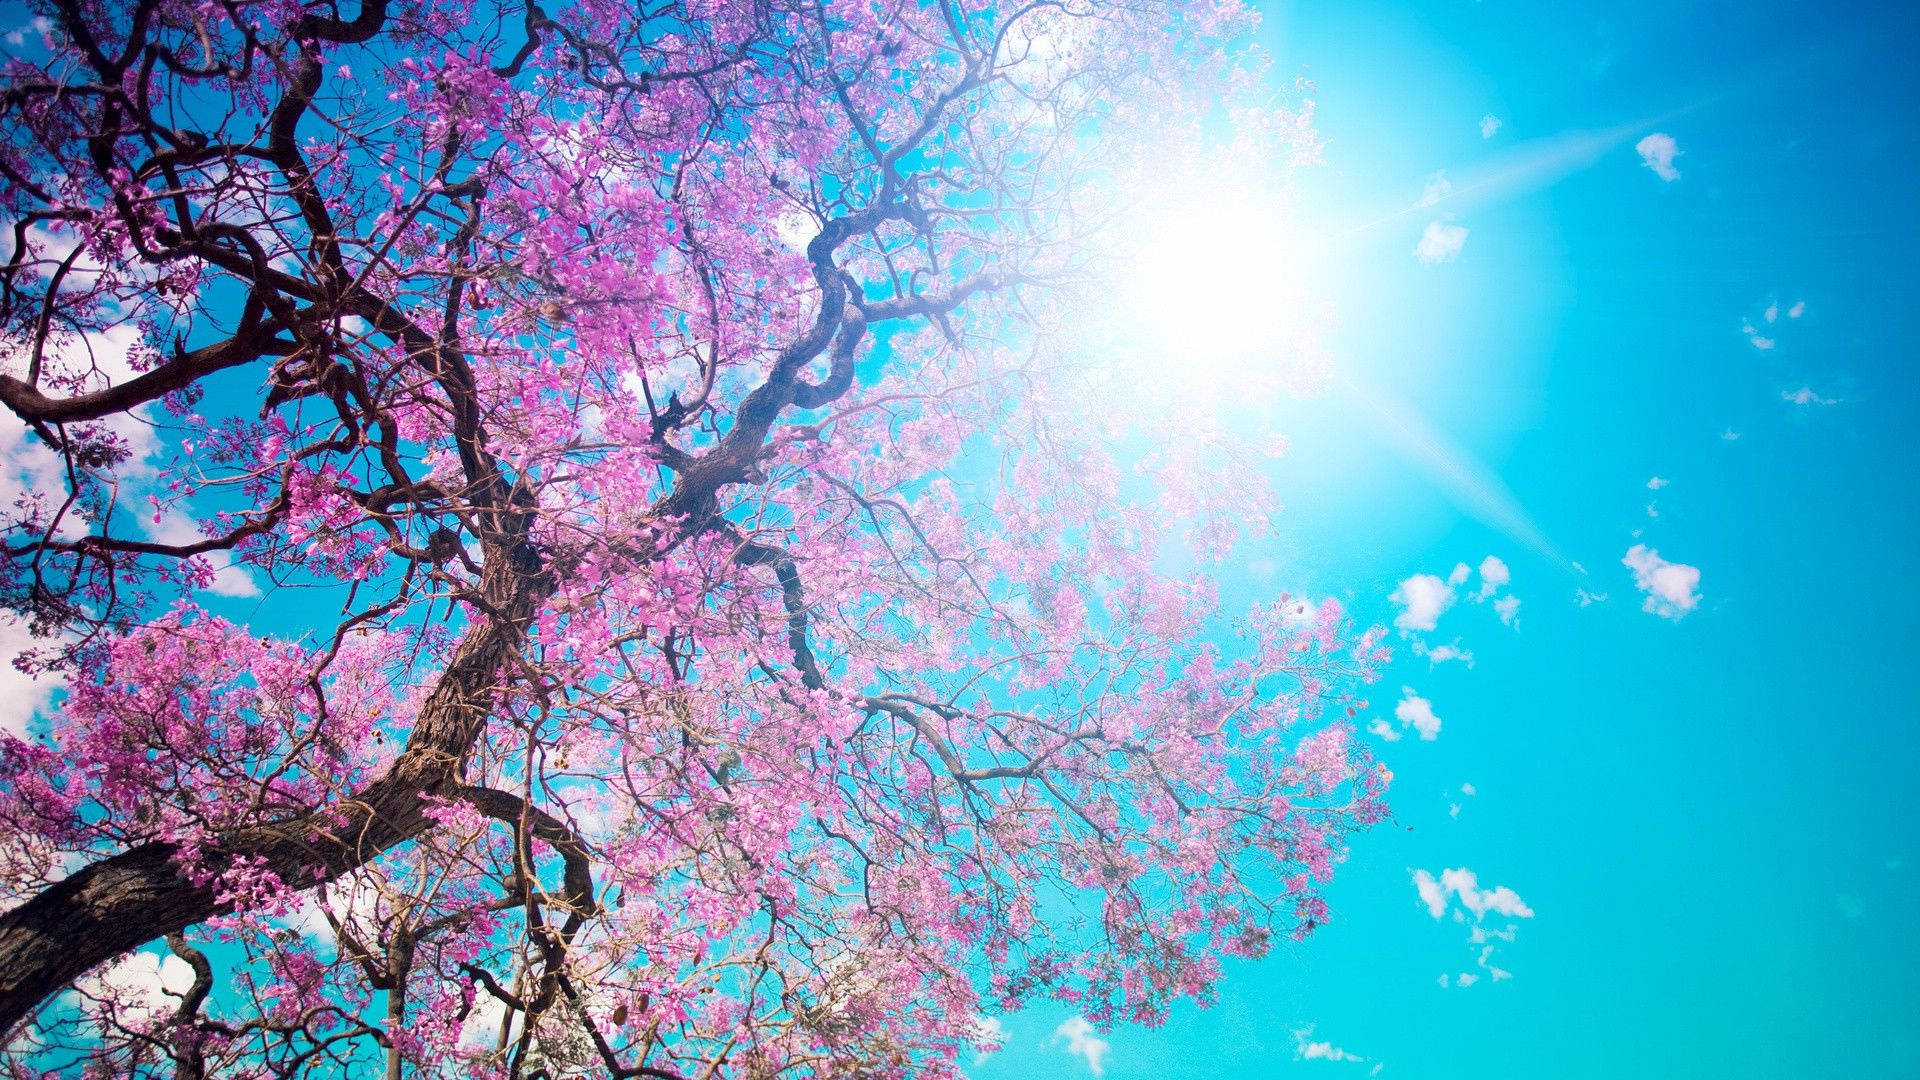 An ideal girly moment with a pink tree and a beautiful blue sky Wallpaper